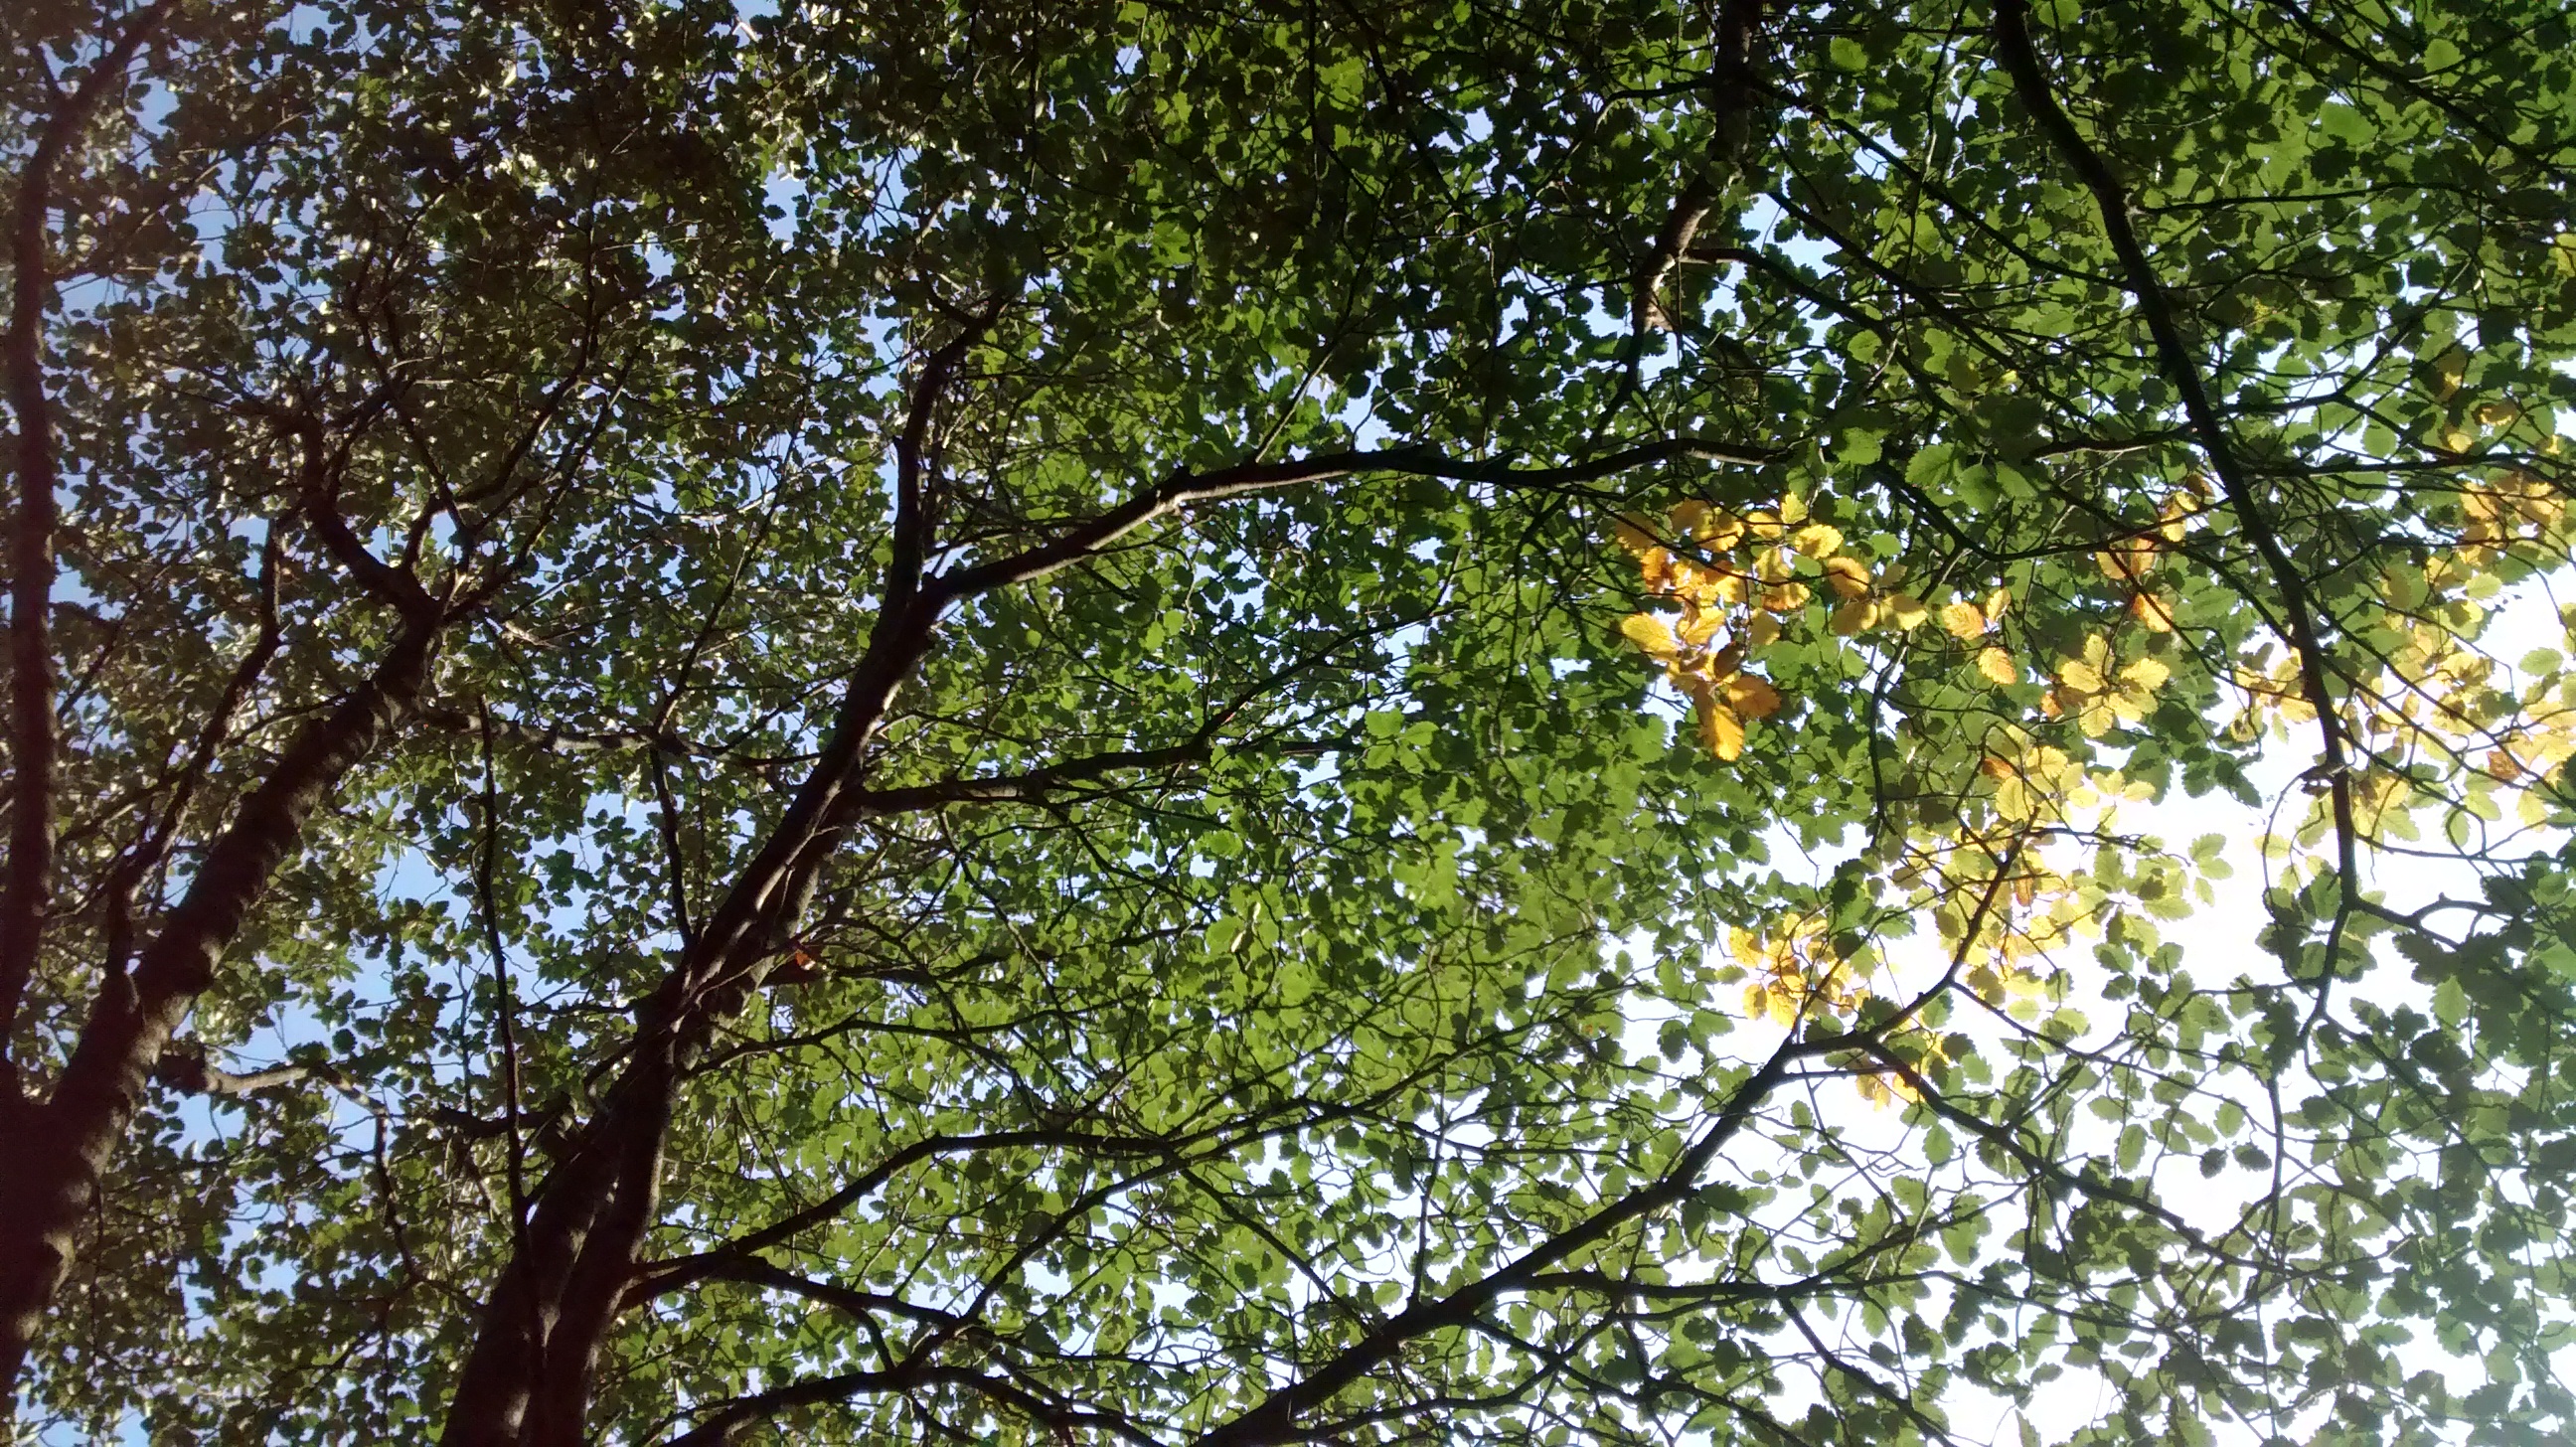 Deciduous trees. Most of the leaves are green, but a few are golden - touched by sun rays.